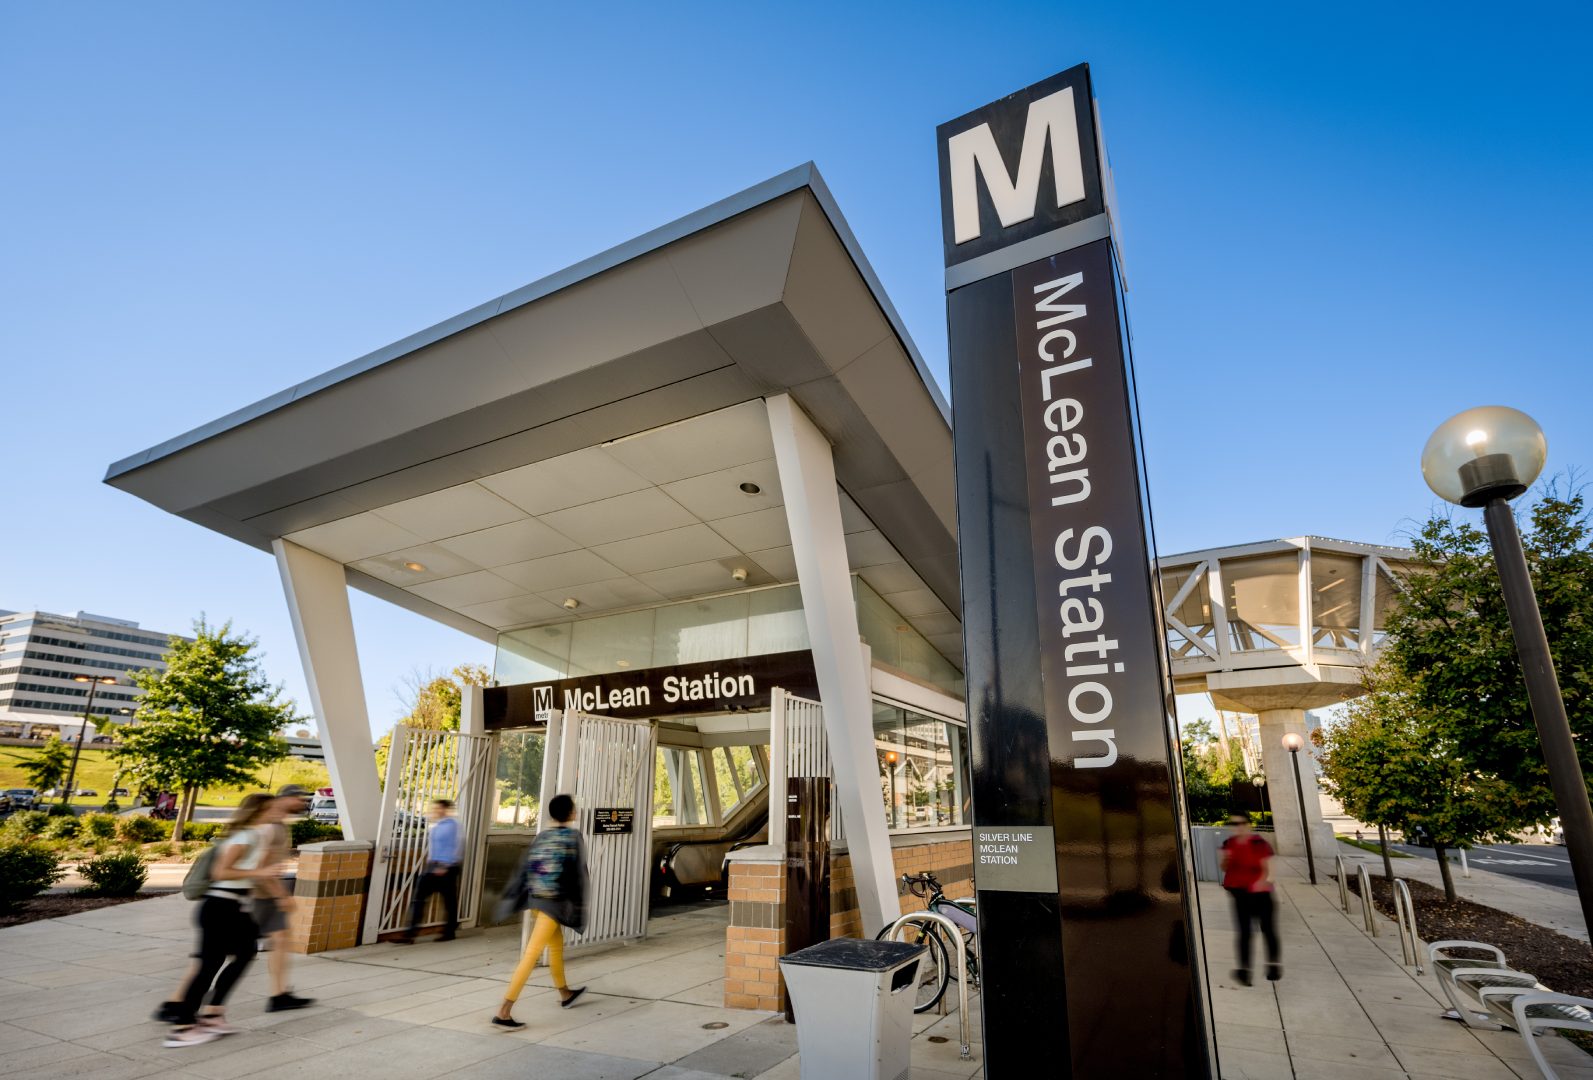 The entrance and signage of McLean Station, a train station in the neighborhood of Heming apartments